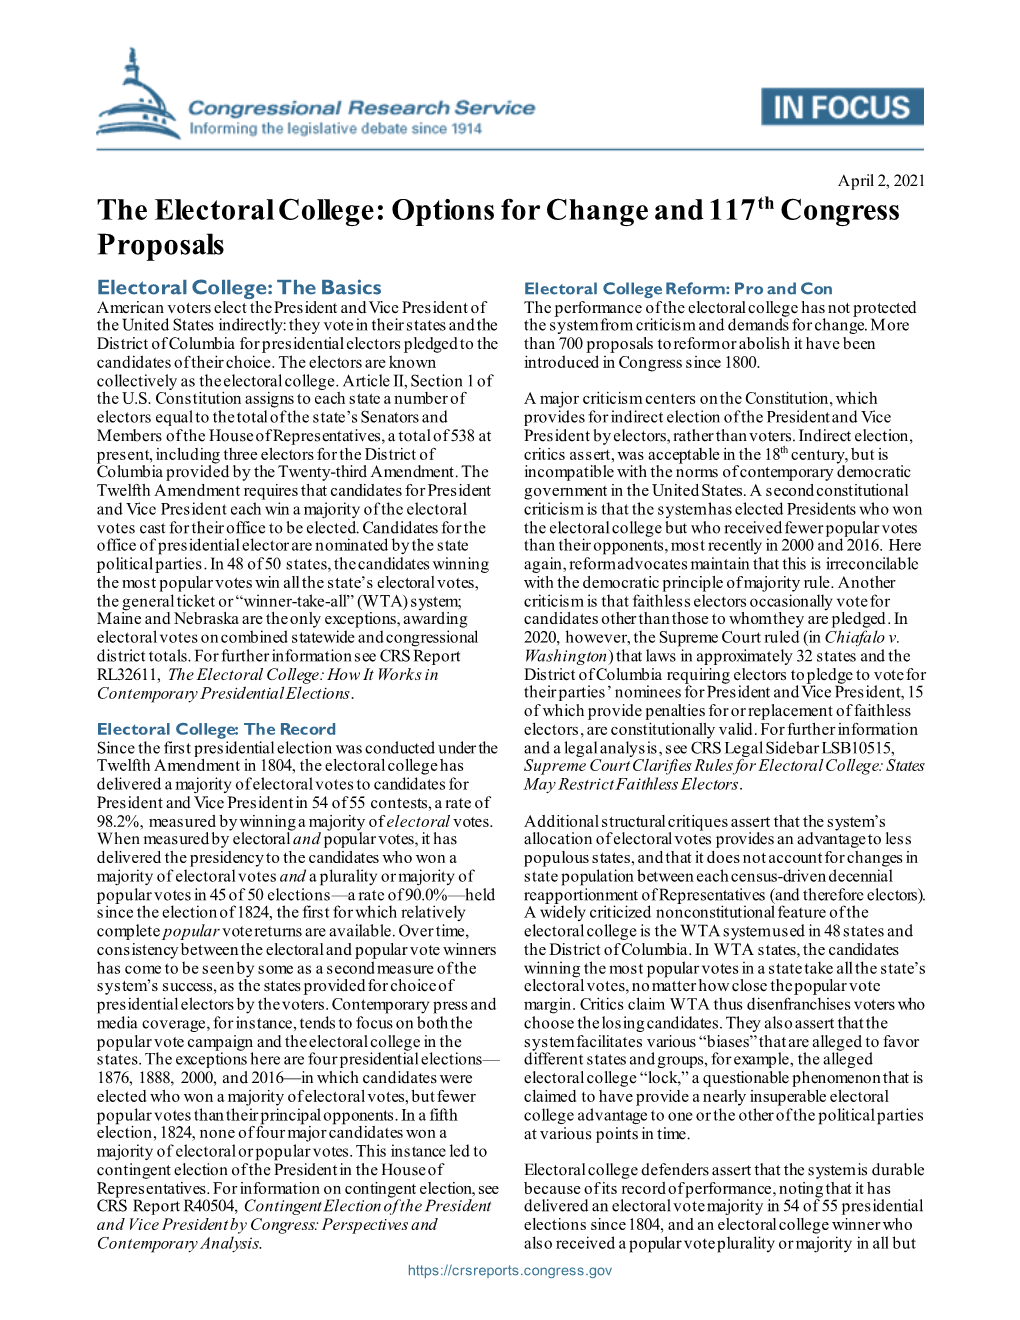 The Electoral College: Options for Change and 117Th Congress Proposals